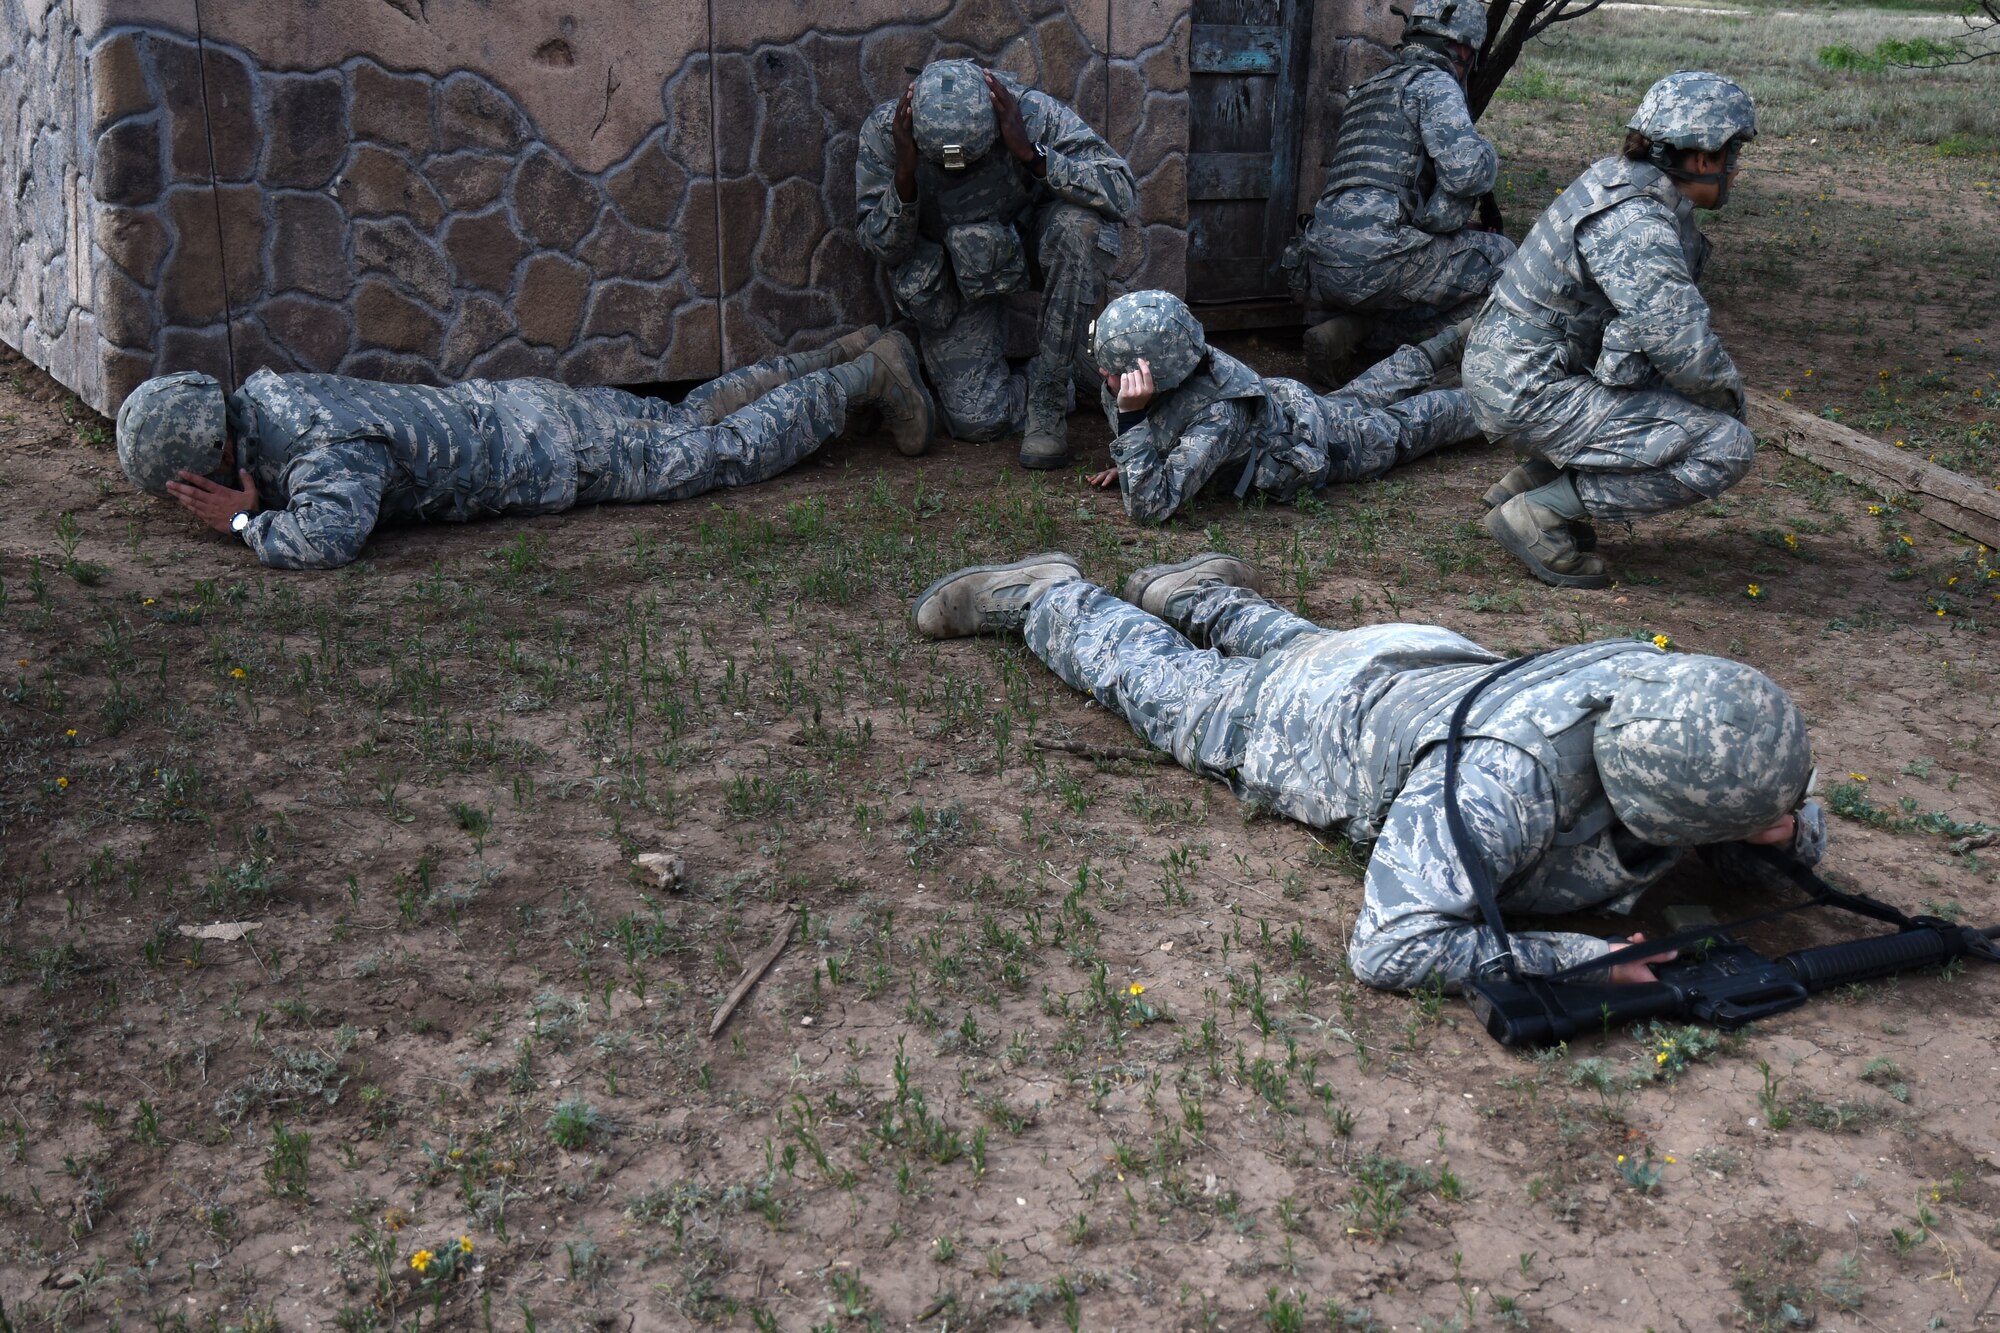 Angelo State University Air Force ROTC cadets go prone after hearing a simulated bomb go off at the mock forward operating base on Goodfellow Air Force Base, Texas, April 21, 2018. The cadets participated in exercises which involved using leadership skills to properly execute a variety of missions. (U.S. Air Force photo by Airman 1st Class Seraiah Hines/Released)